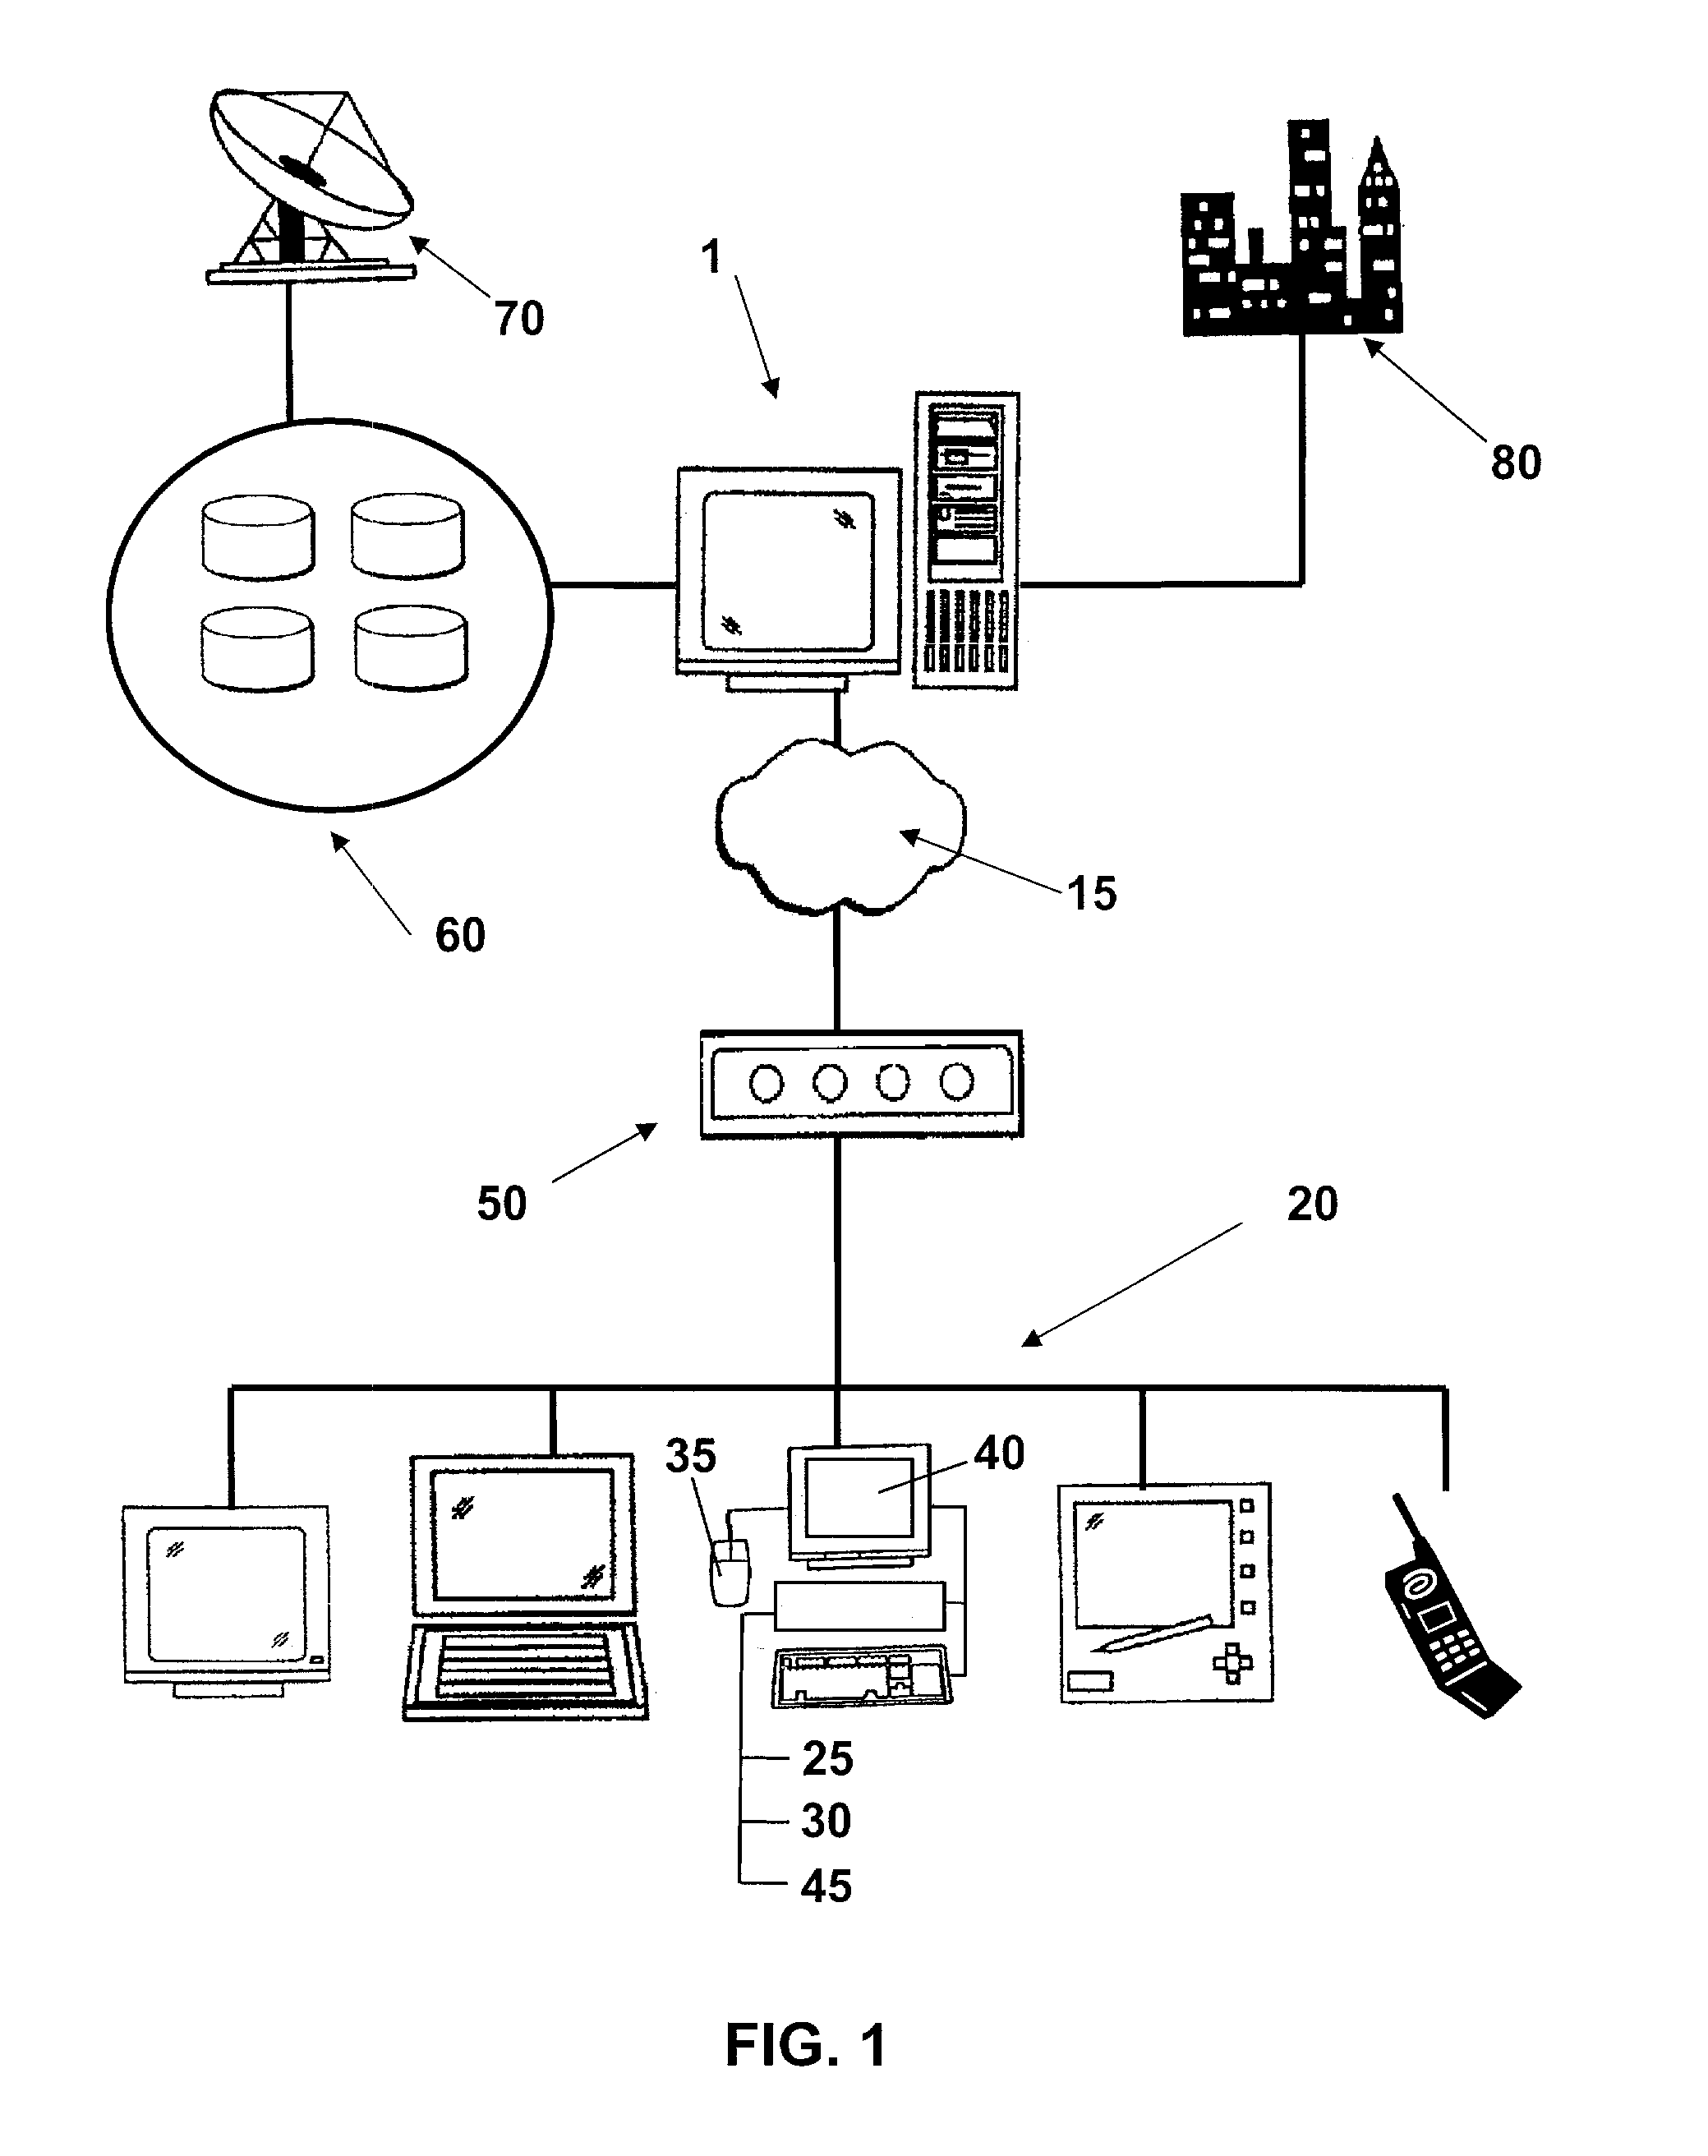 Trading system and method for institutional athletic and education programs